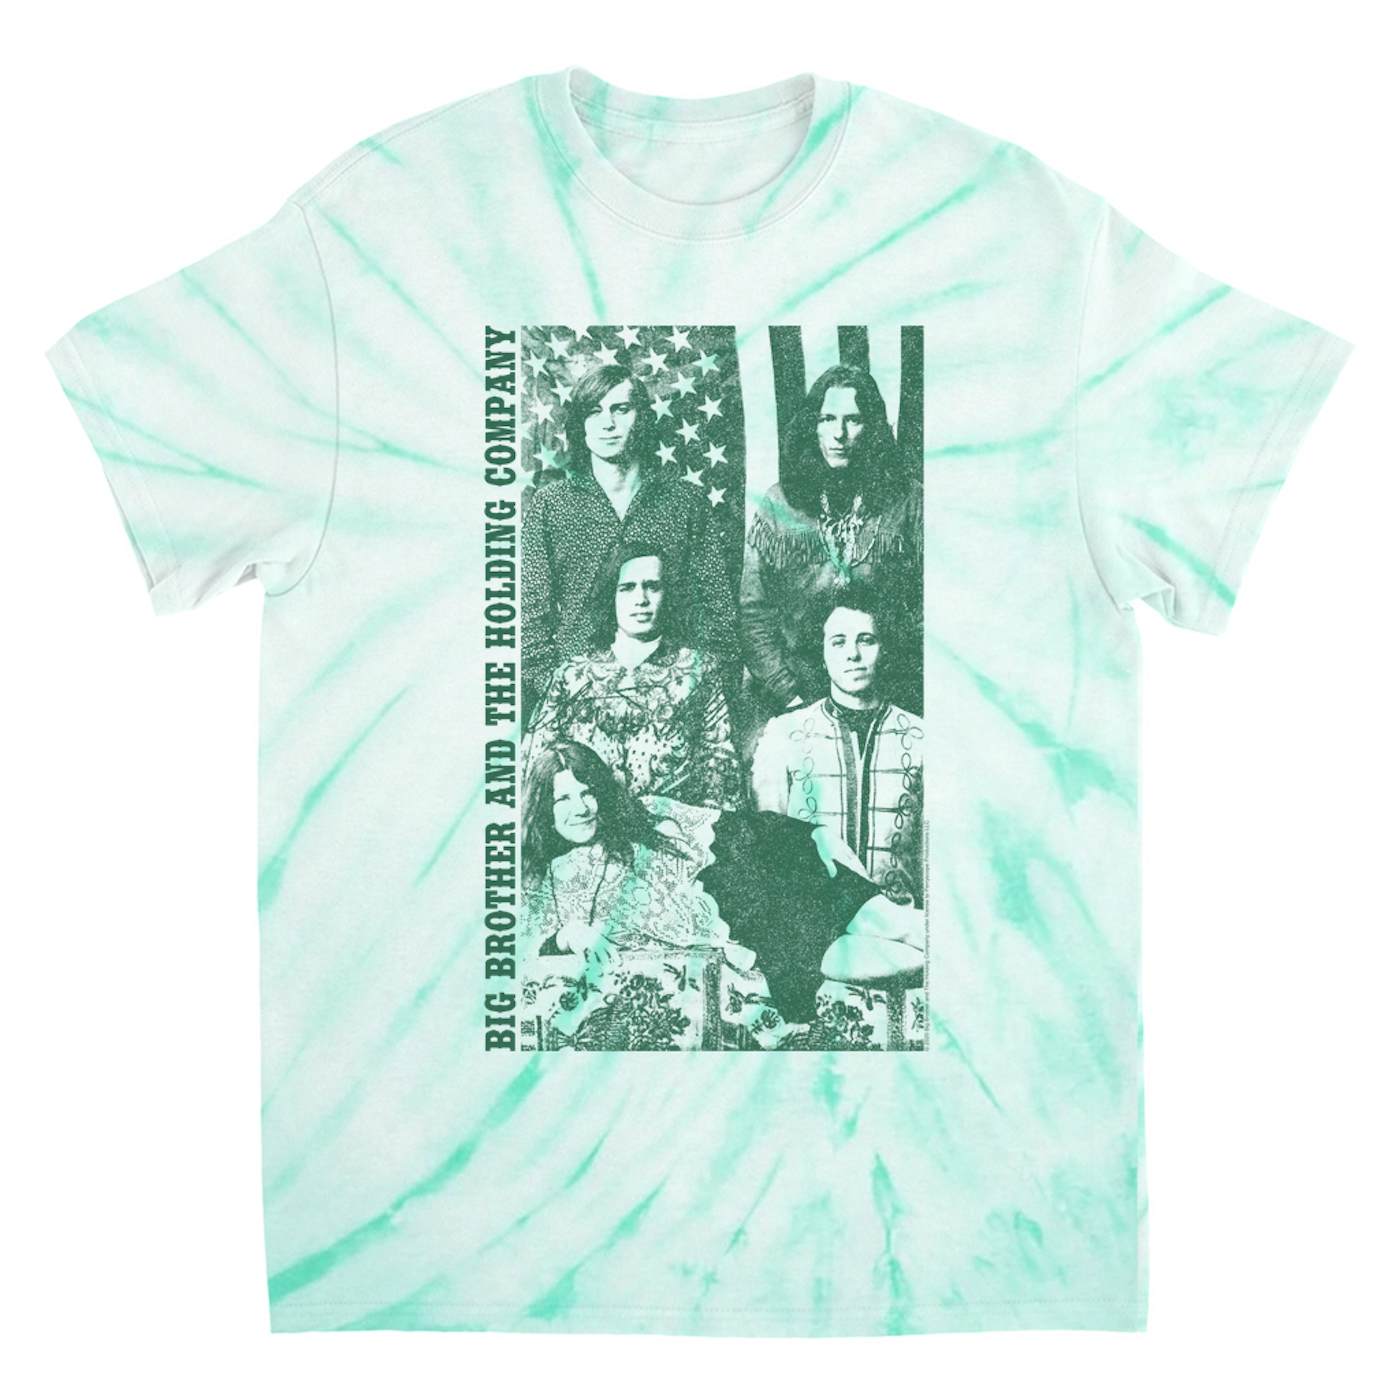 Big Brother & The Holding Company Big Brother and The Holding Co. T-Shirt | Featuring Janis Joplin Group Flag Photo (Merchbar Exclusive) Big Brother and The Holding Co. Tie Dye Shirt